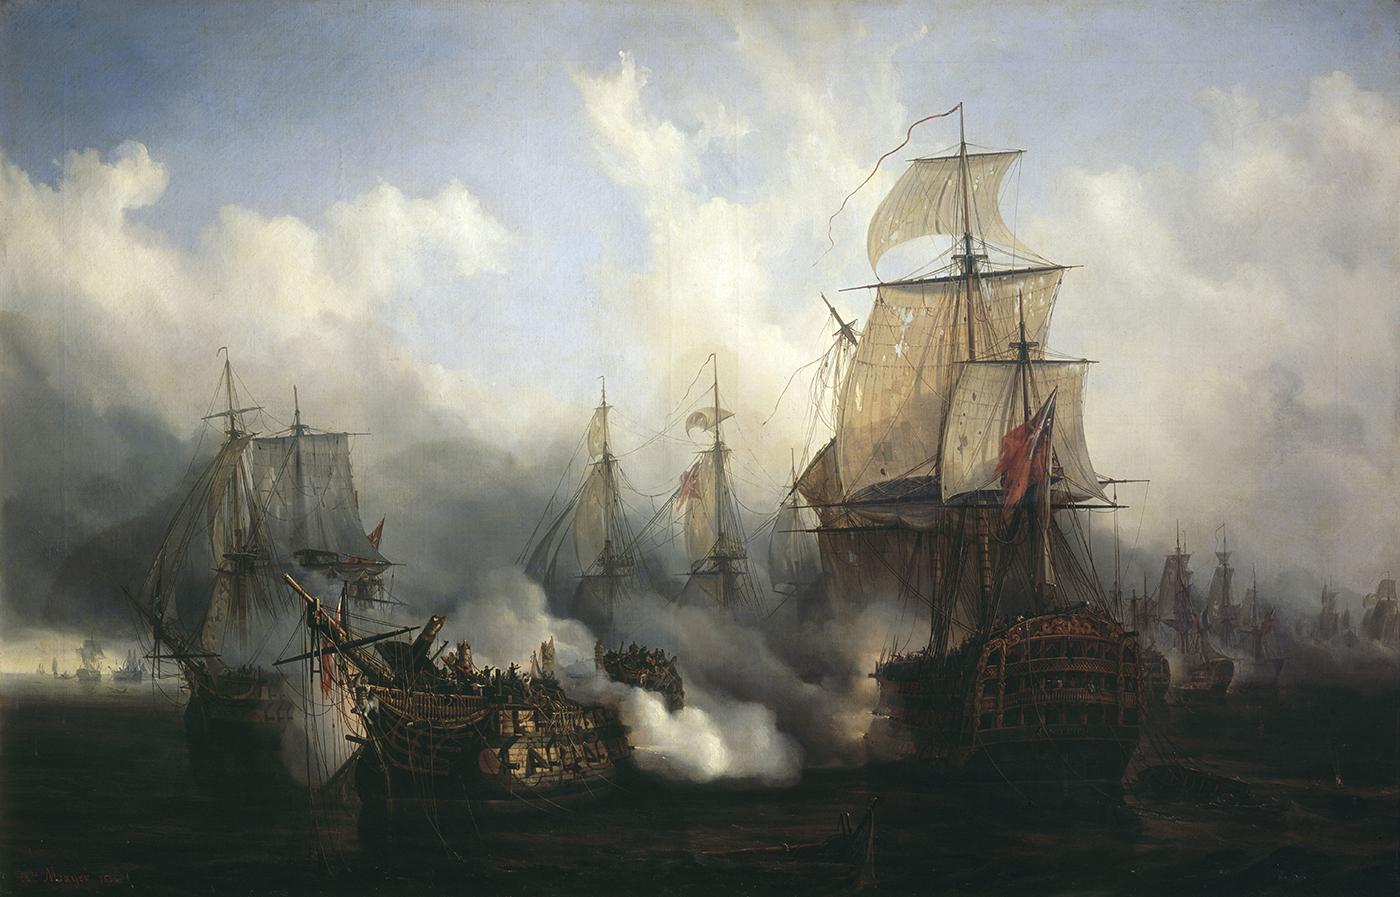 The British HMS Sandwich fires to the French flagship Bucentaure (completely dismasted) in the battle of Trafalgar. Bucentaure also fights HMS Victory (behind her) and HMS Temeraire (left side of the picture). HMS Sandwich never fought at Trafalgar and her depiction is a mistake by the painter